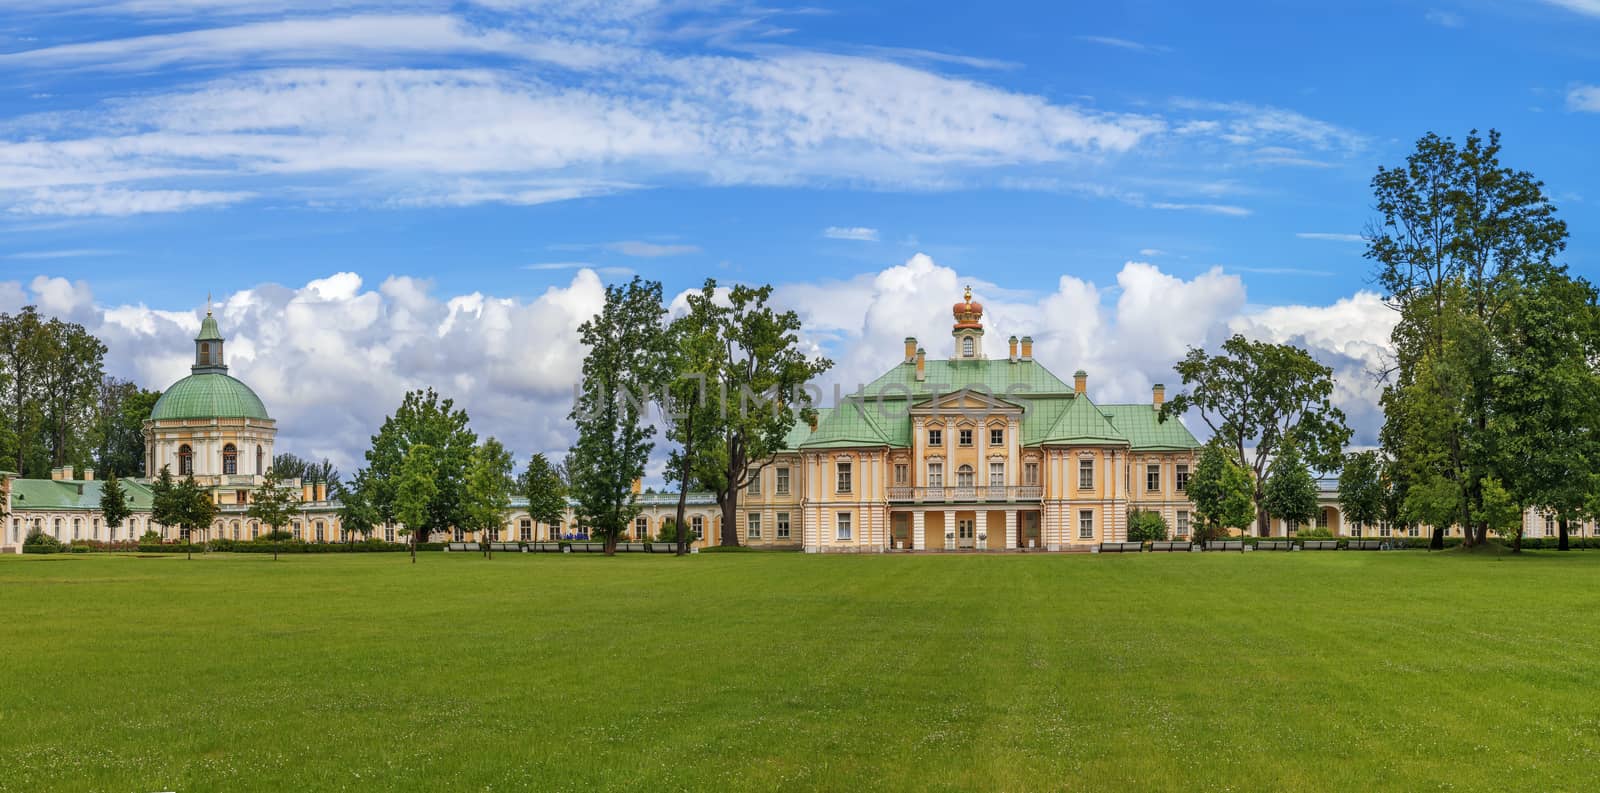 Grand Menshikov Palace was built from 1710 to 1727 in  Oranienbaum, Russia